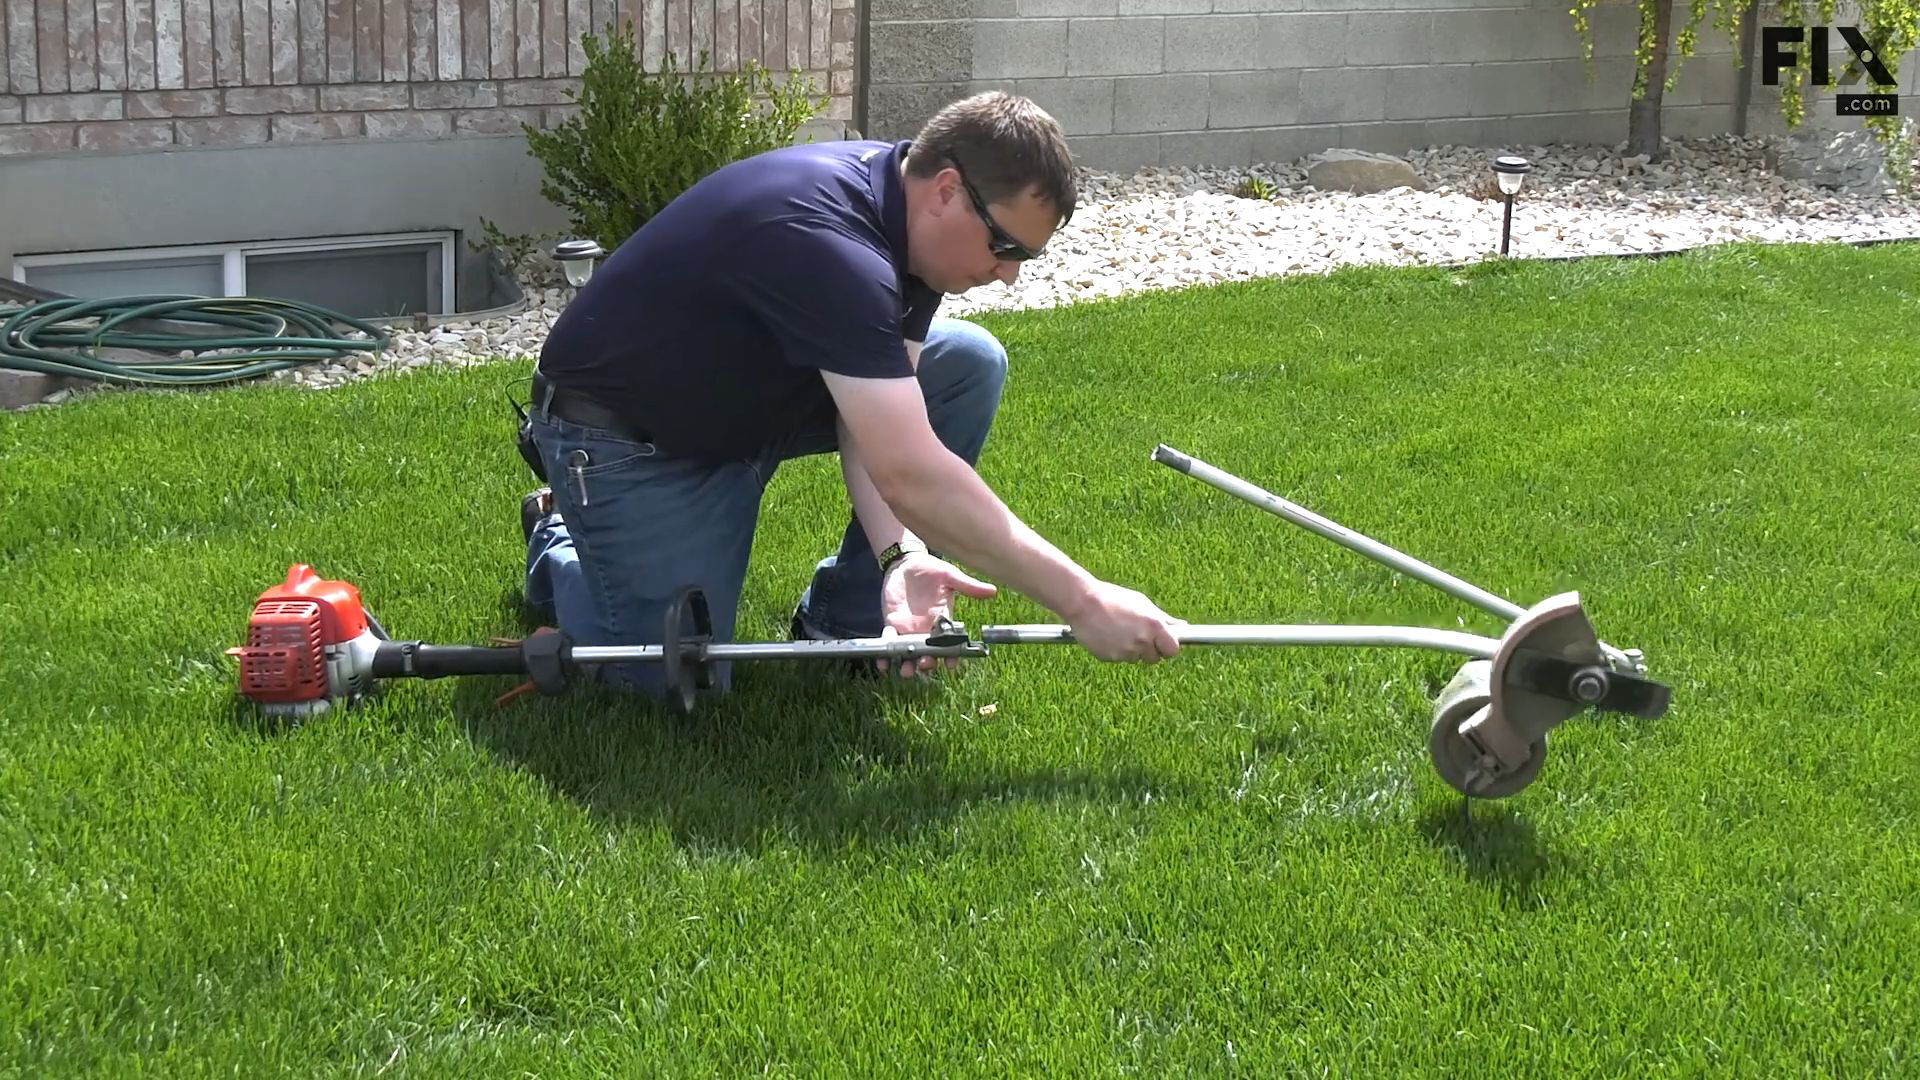 Man on a lawn changing the head attachments on a lawn tool, that uses a split-boom system, from a trimmer head to an edger head